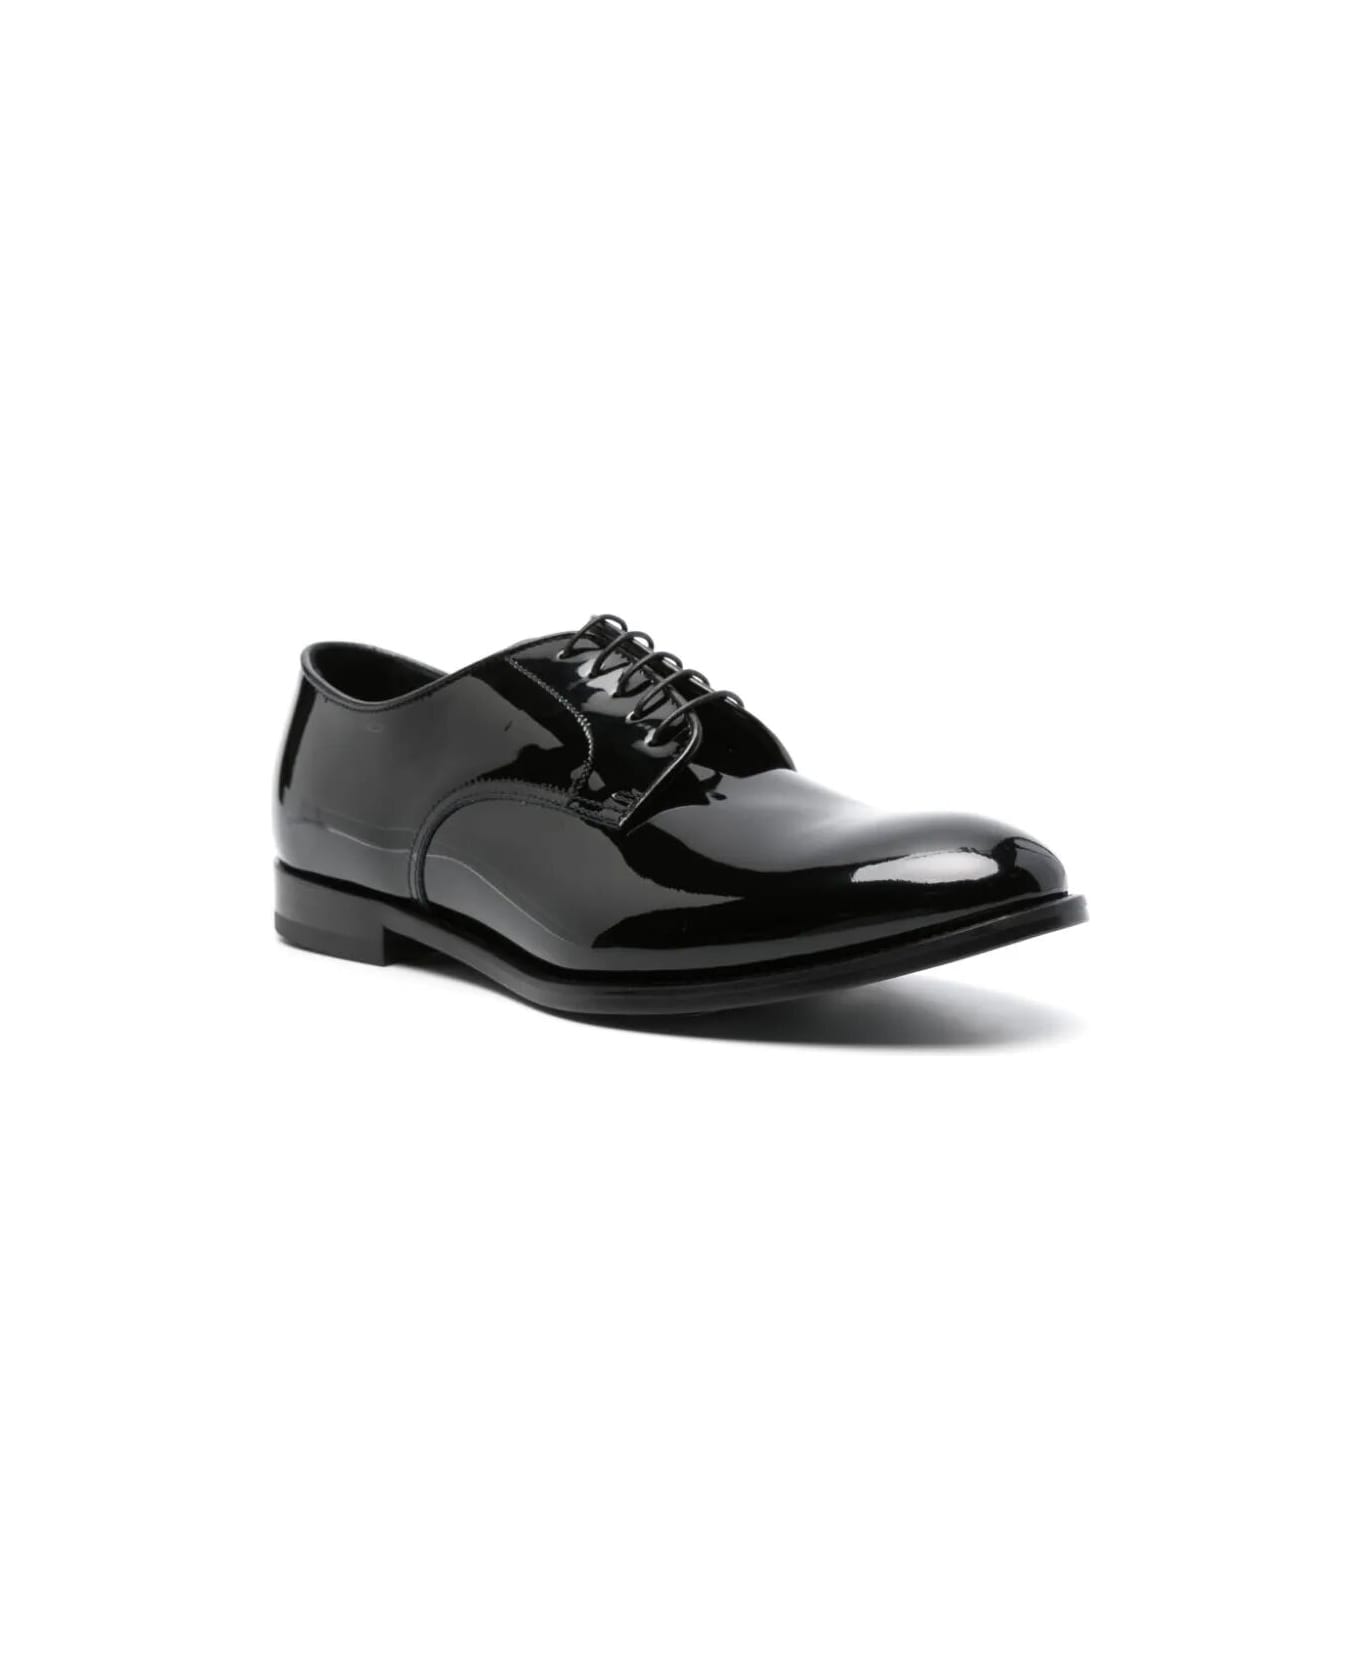 Doucal's Derby Shoes - Black ローファー＆デッキシューズ